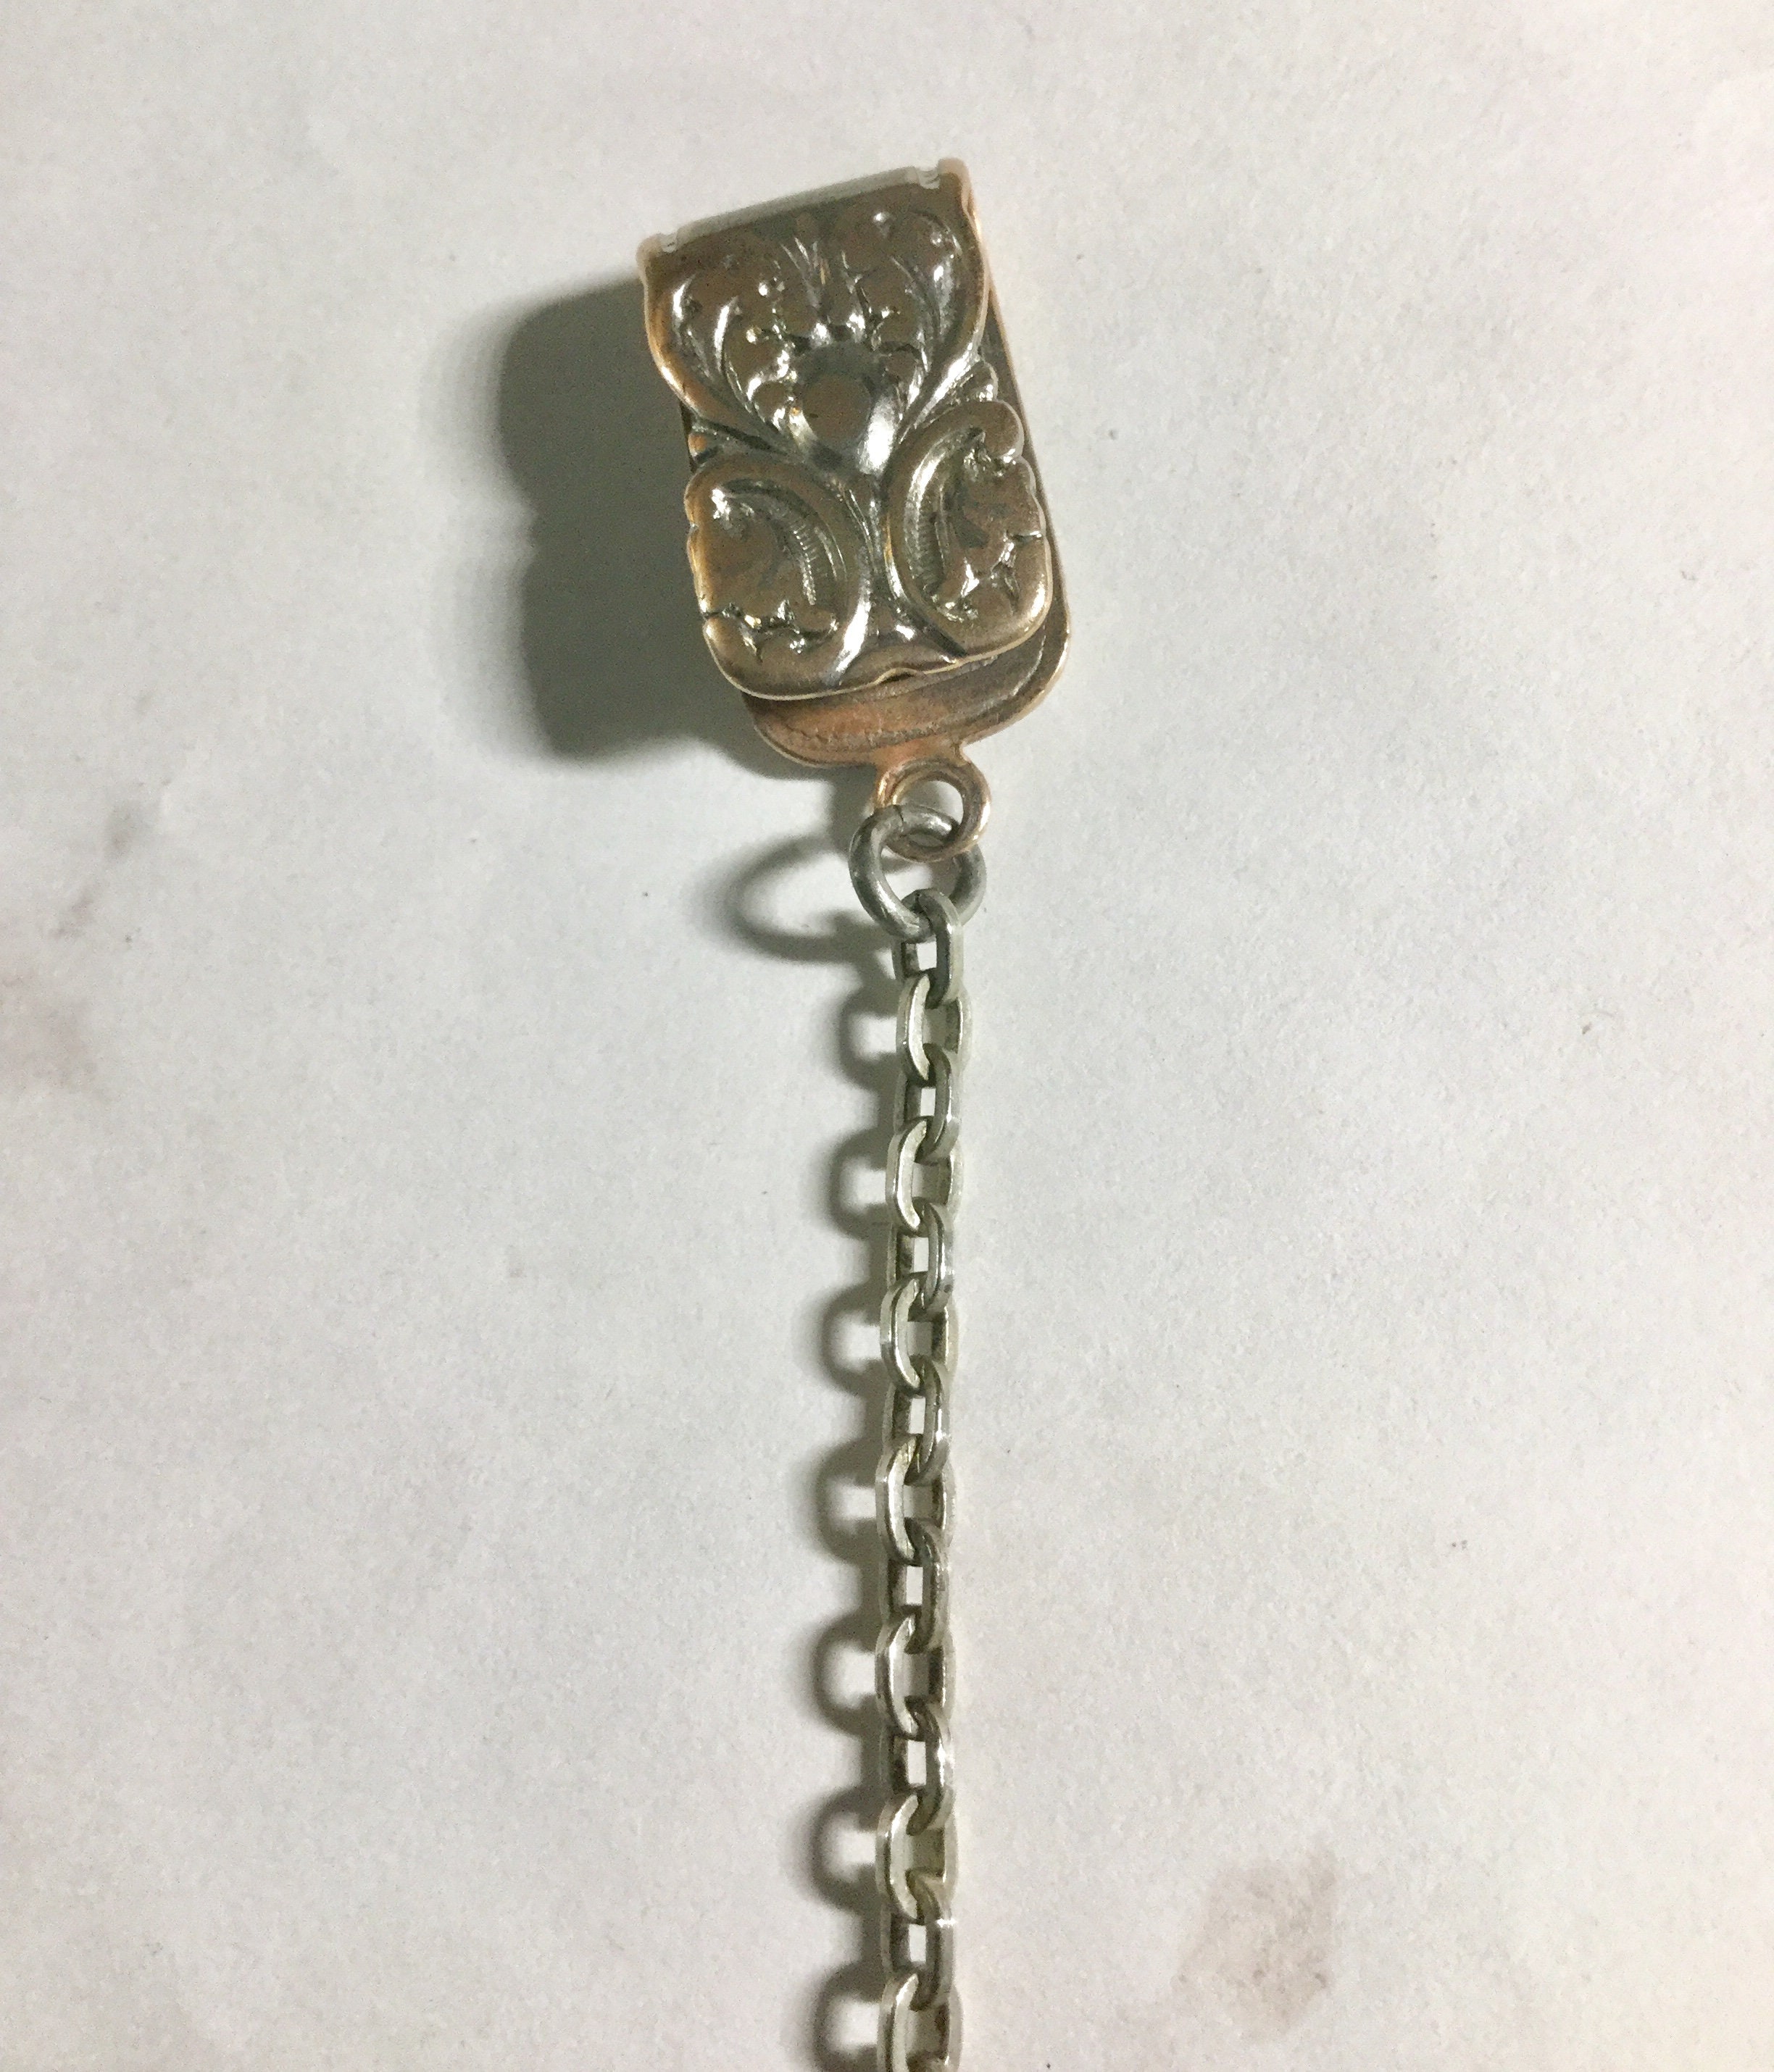 1930s Pocket Watch Chain Nickel Snap on Clip 6 1/2 inches 2mm